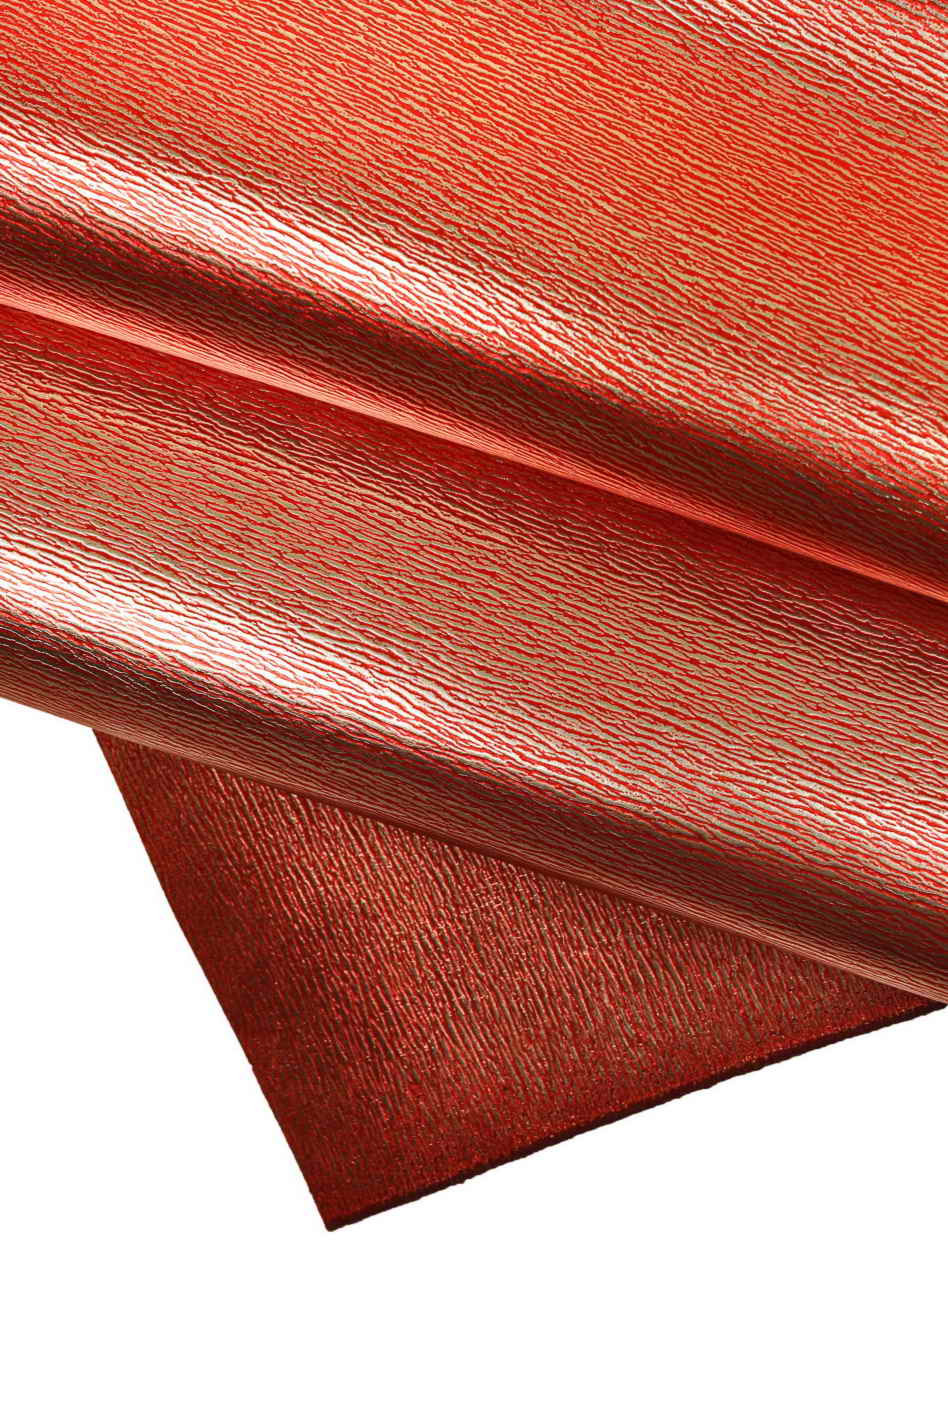 Metallic Red Leather Hides